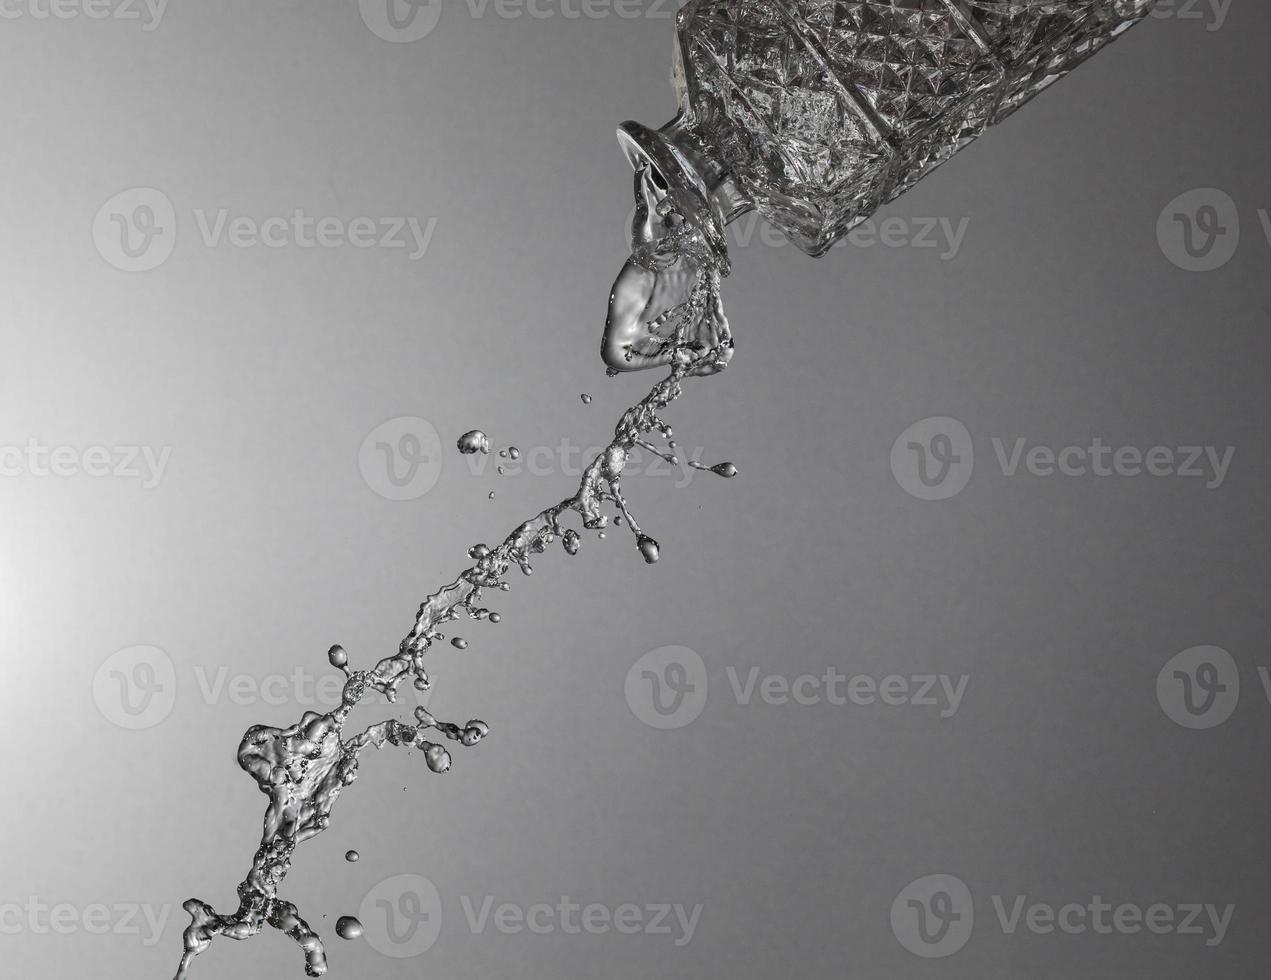 Falling water on a silver background photo